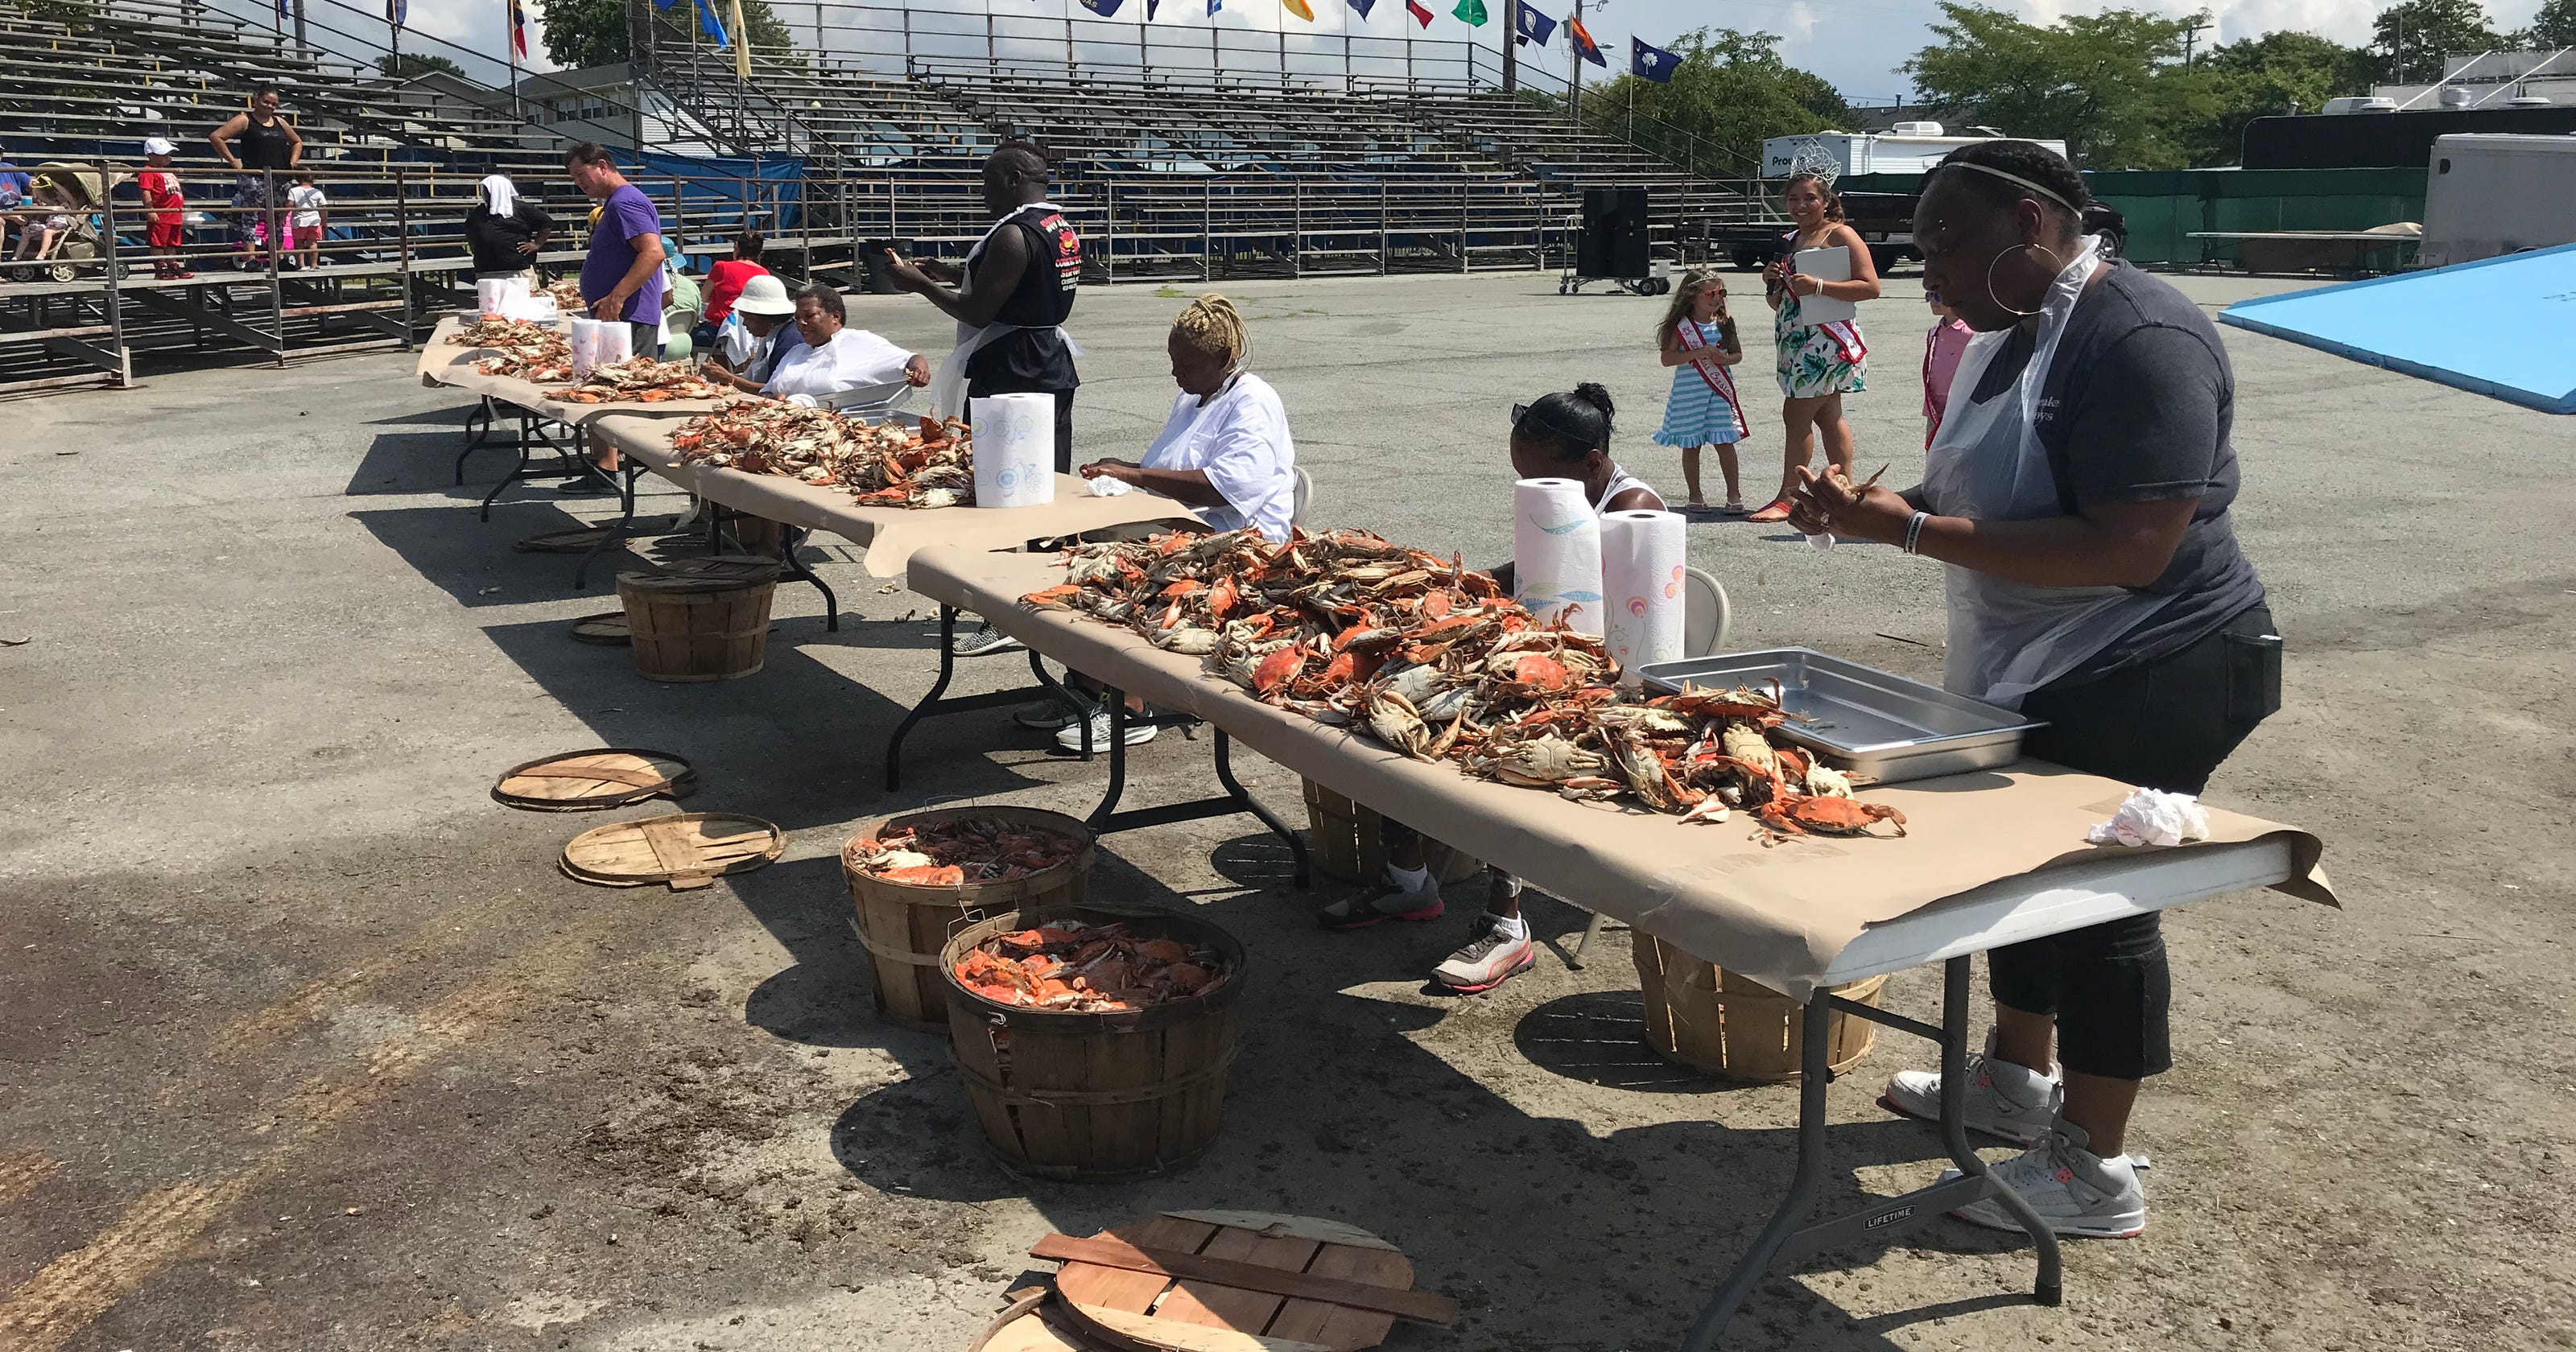 Crisfield's Hard Crab Derby draws crowds, competition